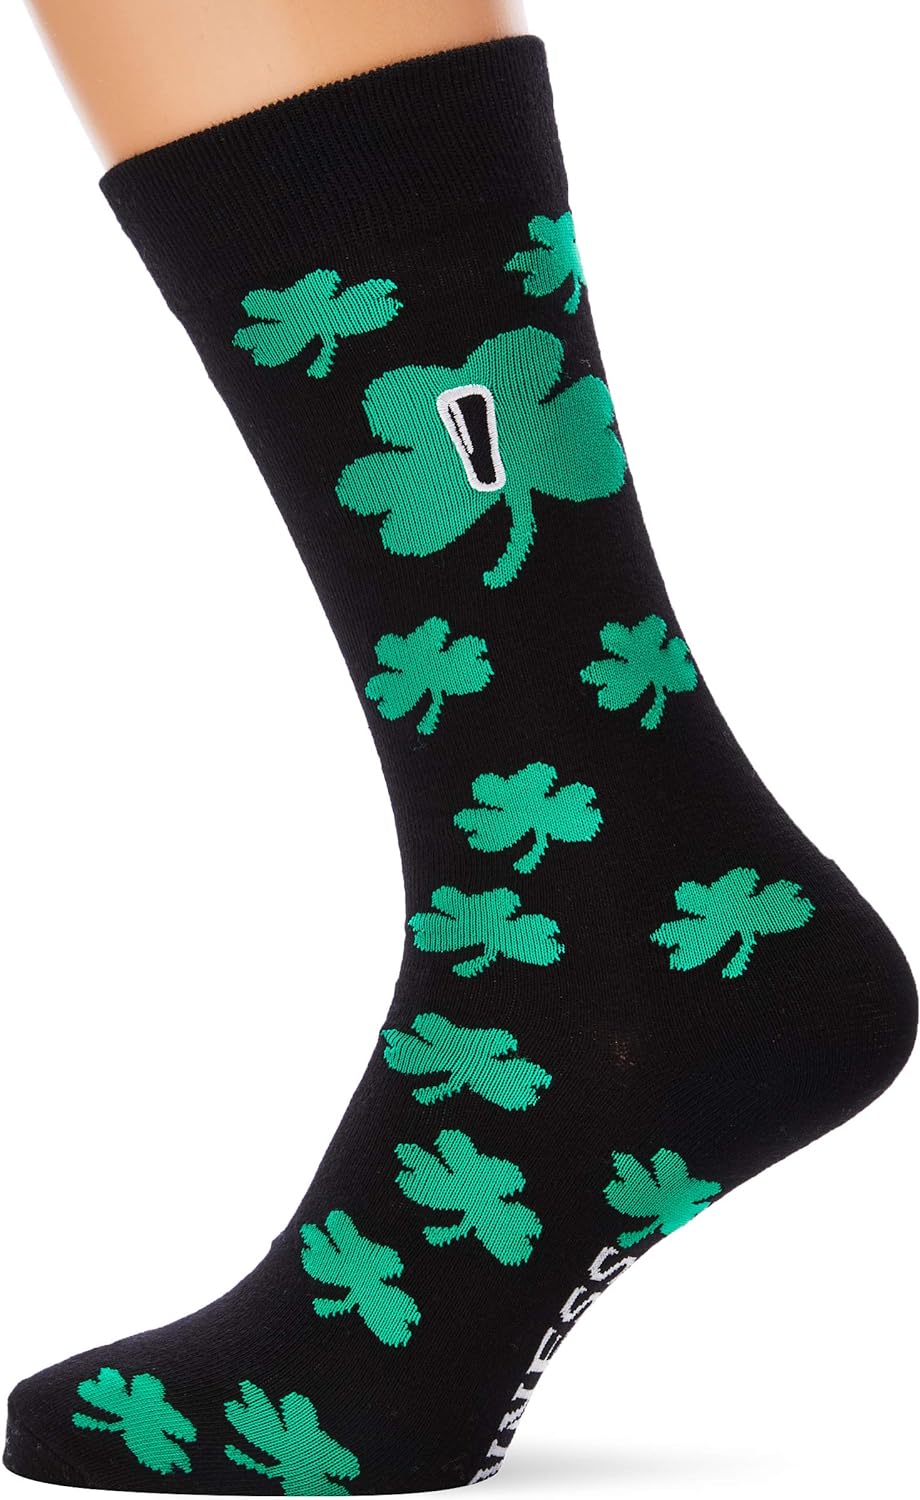 A person wearing a pair of black Guinness Shamrock Socks decorated with green shamrocks and a small, white rectangular Guinness logo near the calf.